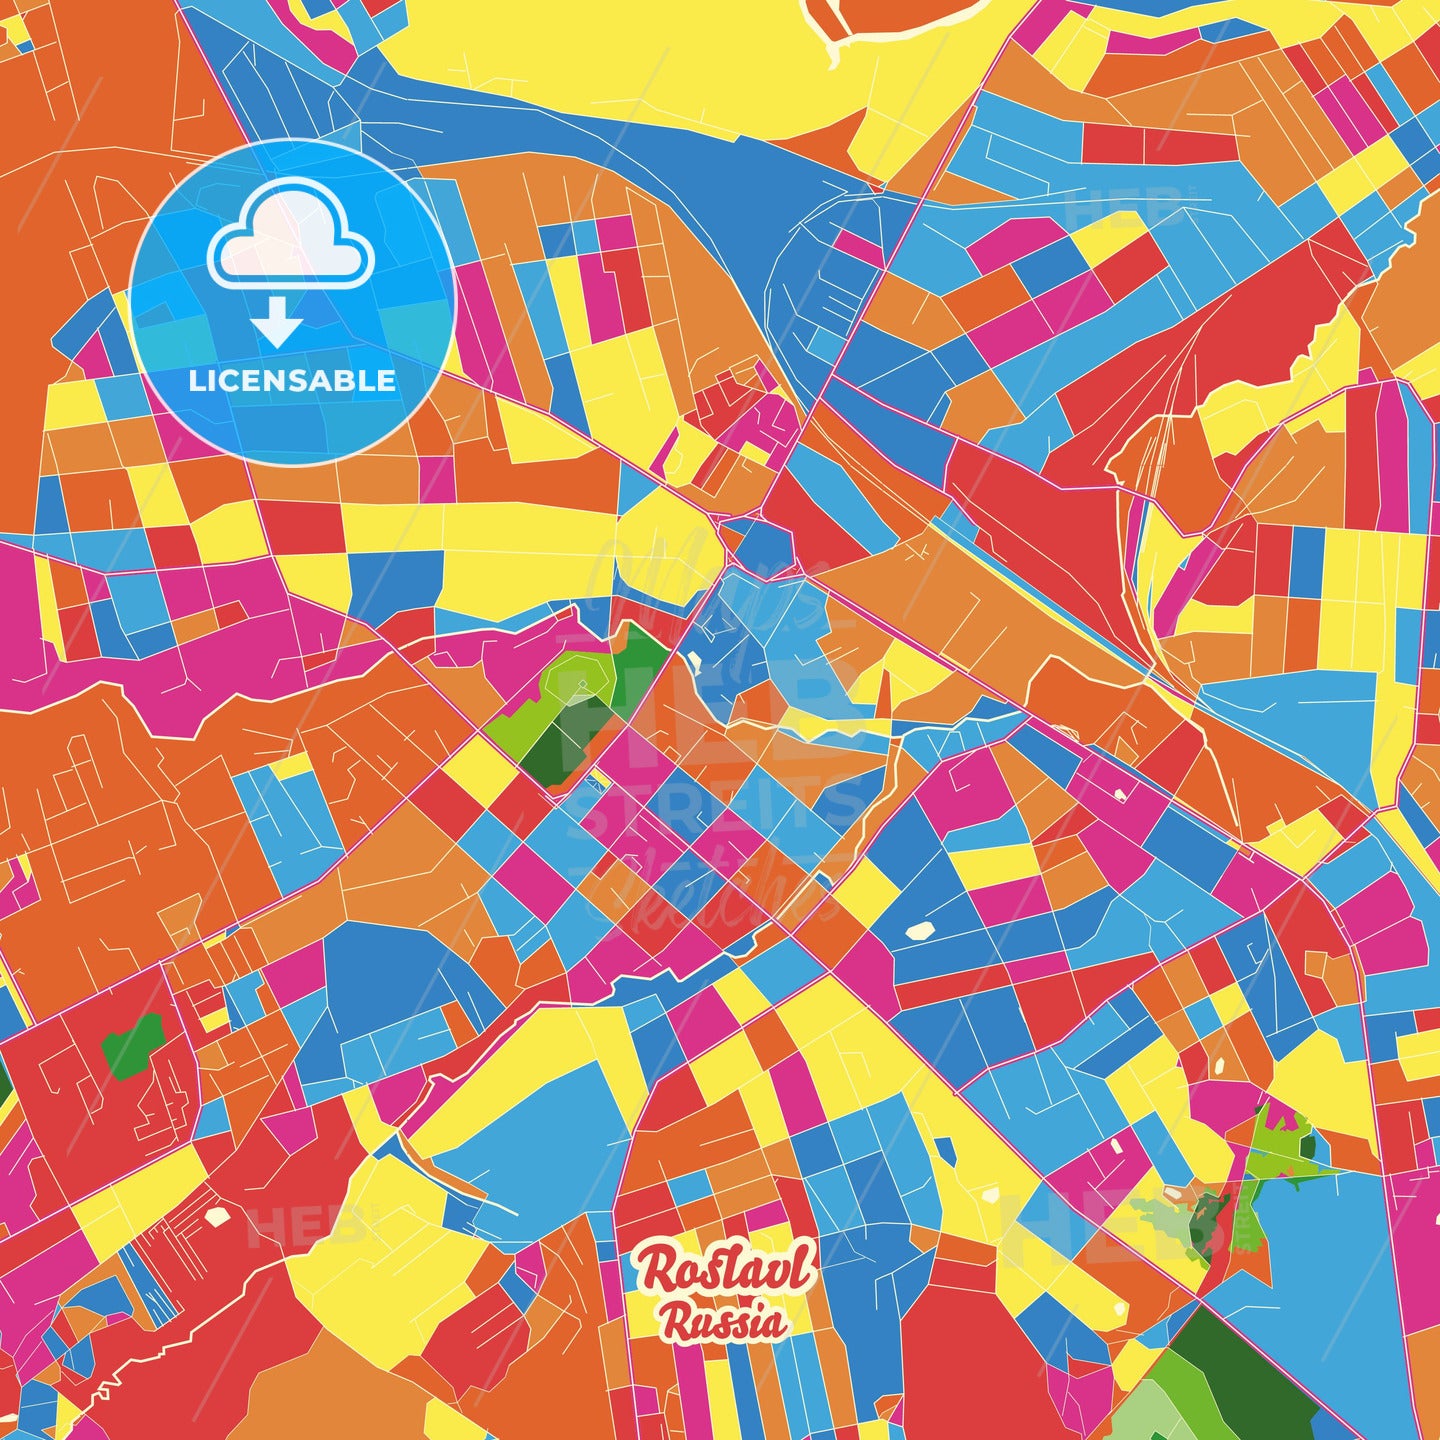 Roslavl, Russia Crazy Colorful Street Map Poster Template - HEBSTREITS Sketches